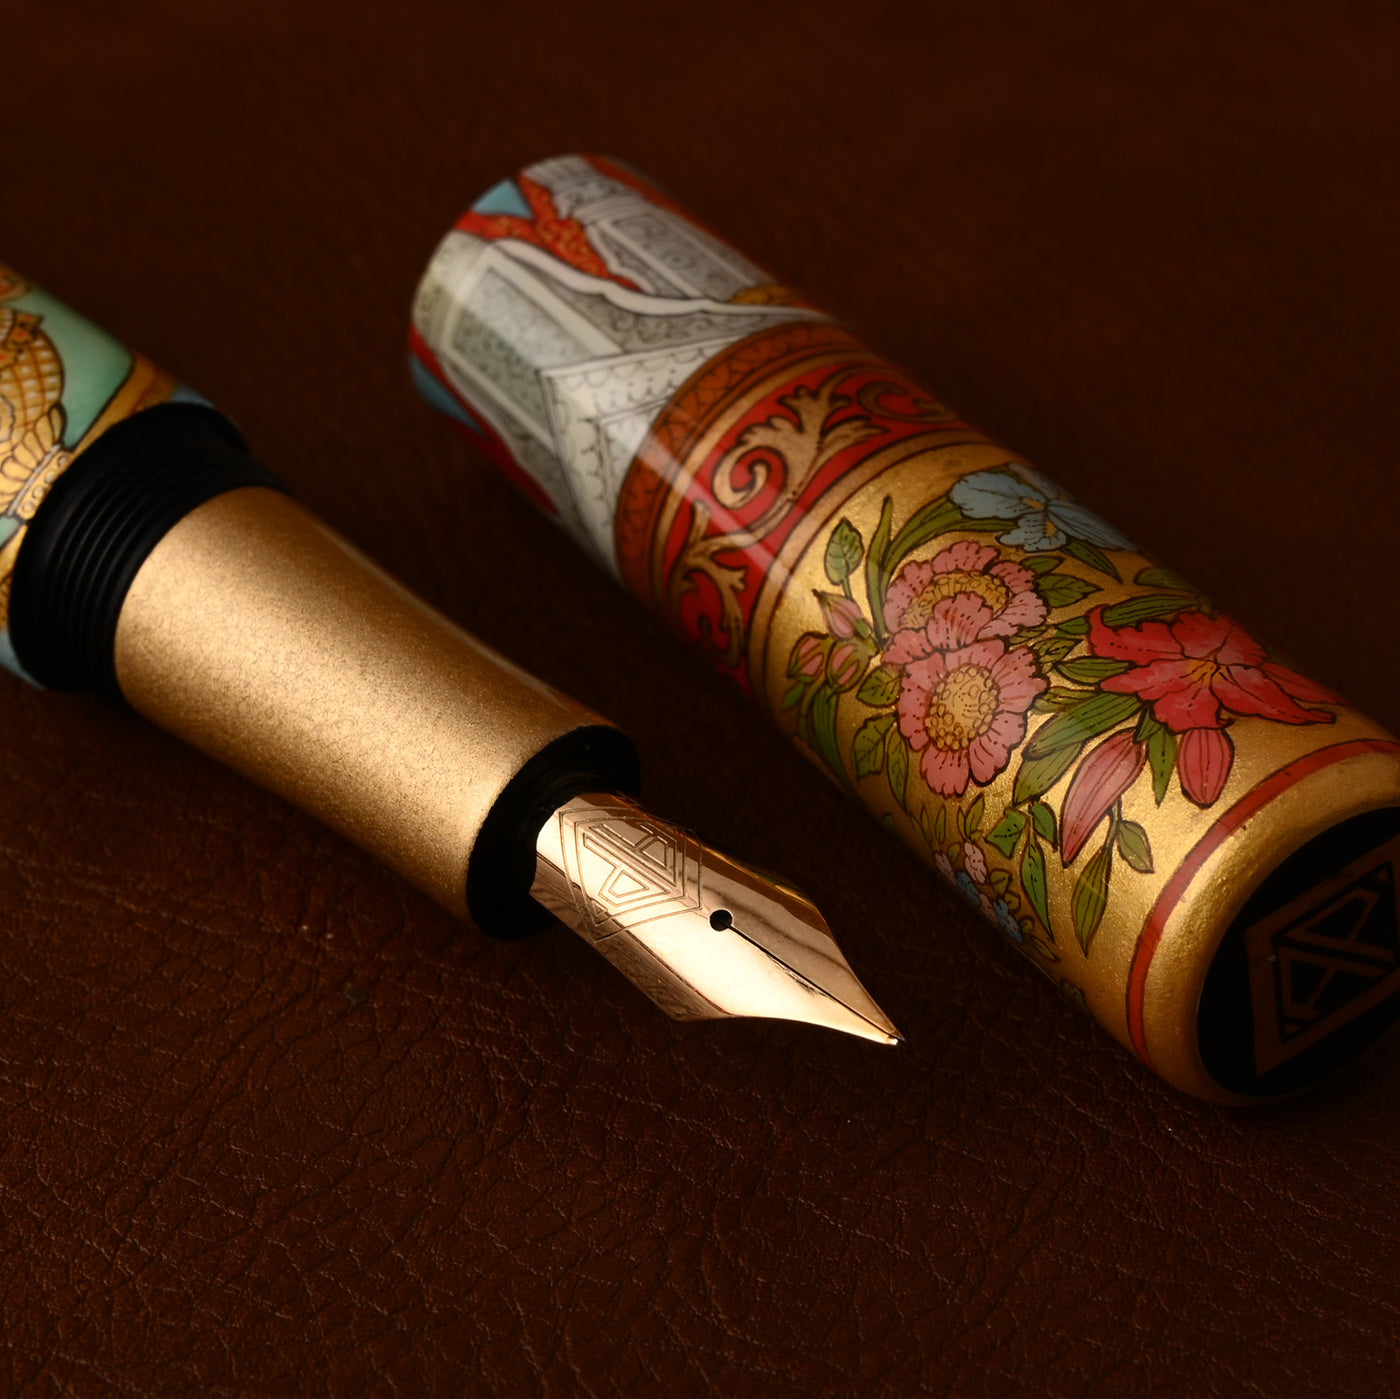 AP Limited Editions Russian Lacquer Art Fountain Pen - Ganesha (Limited Edition) 1